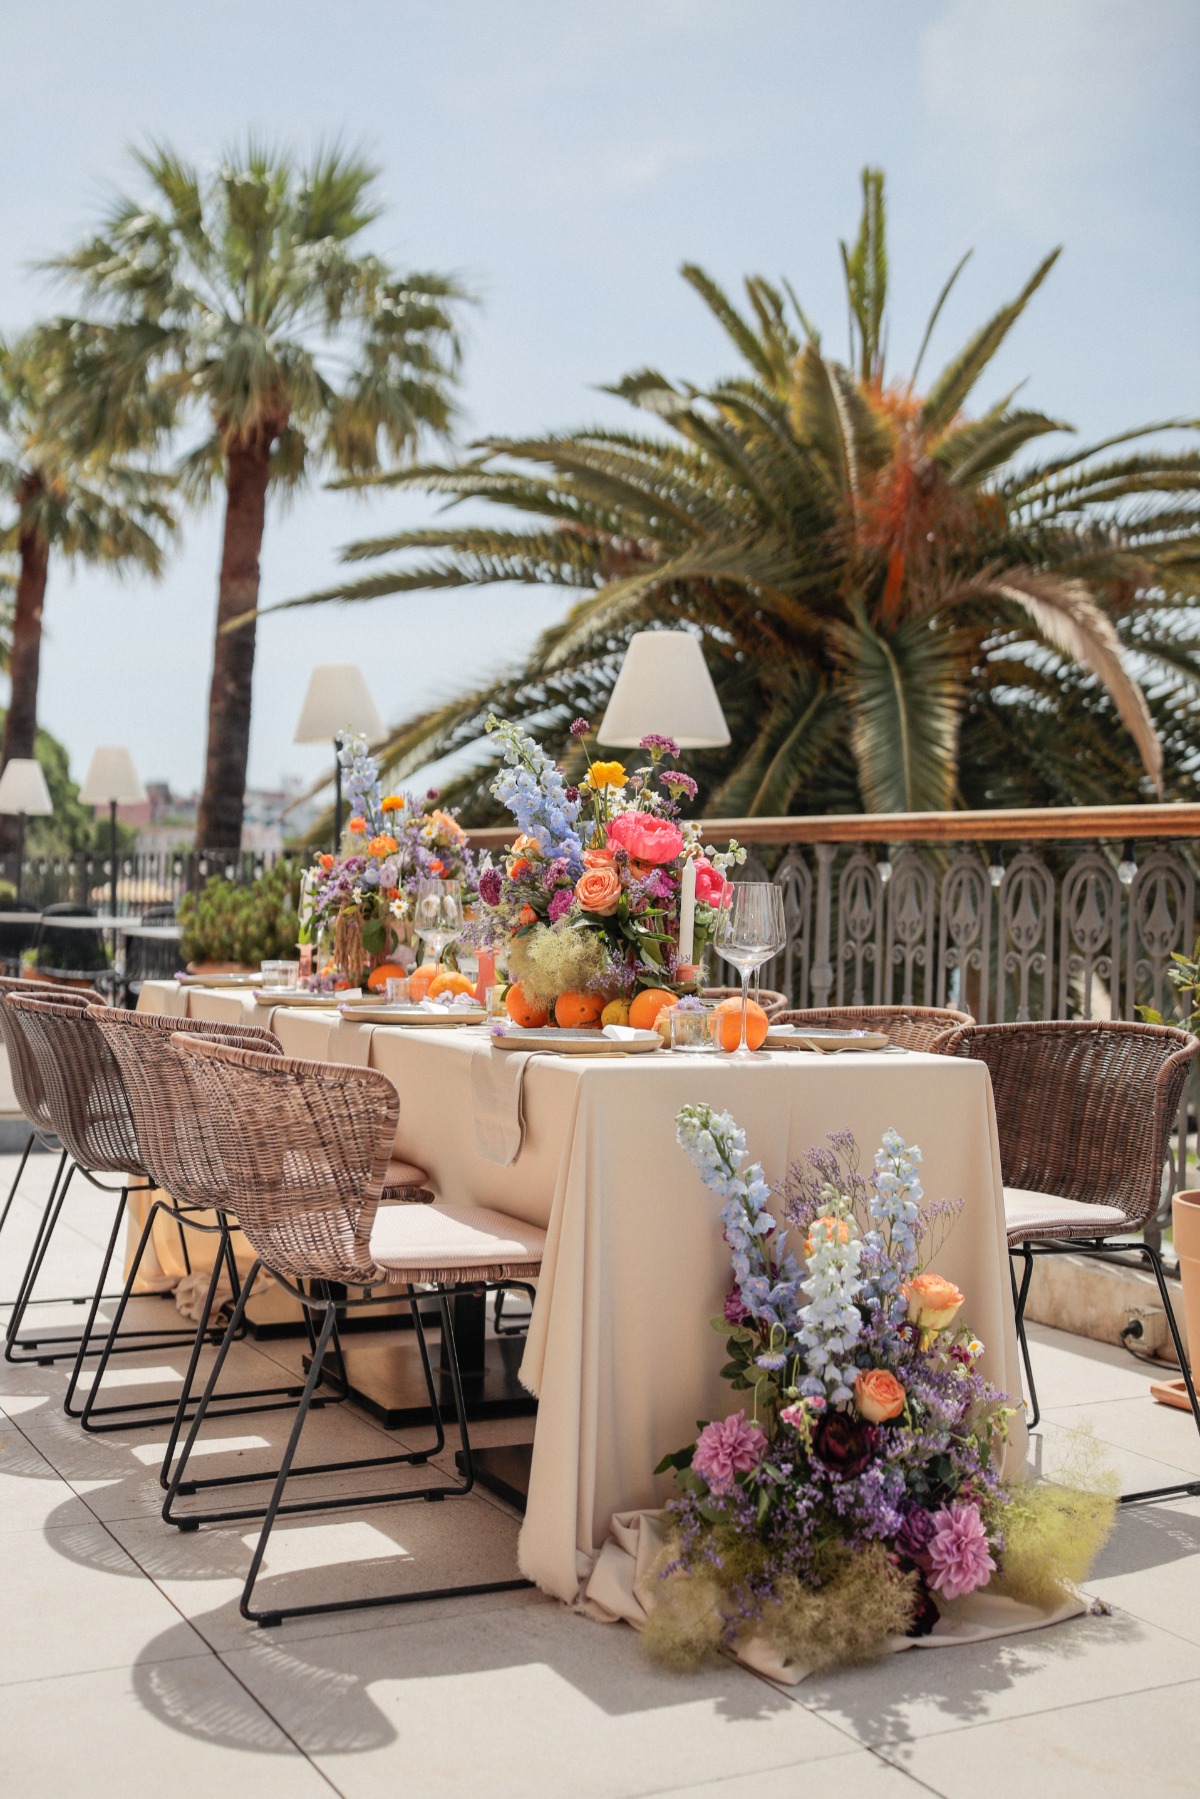 View of reception table with floral arrangements and palm trees in background